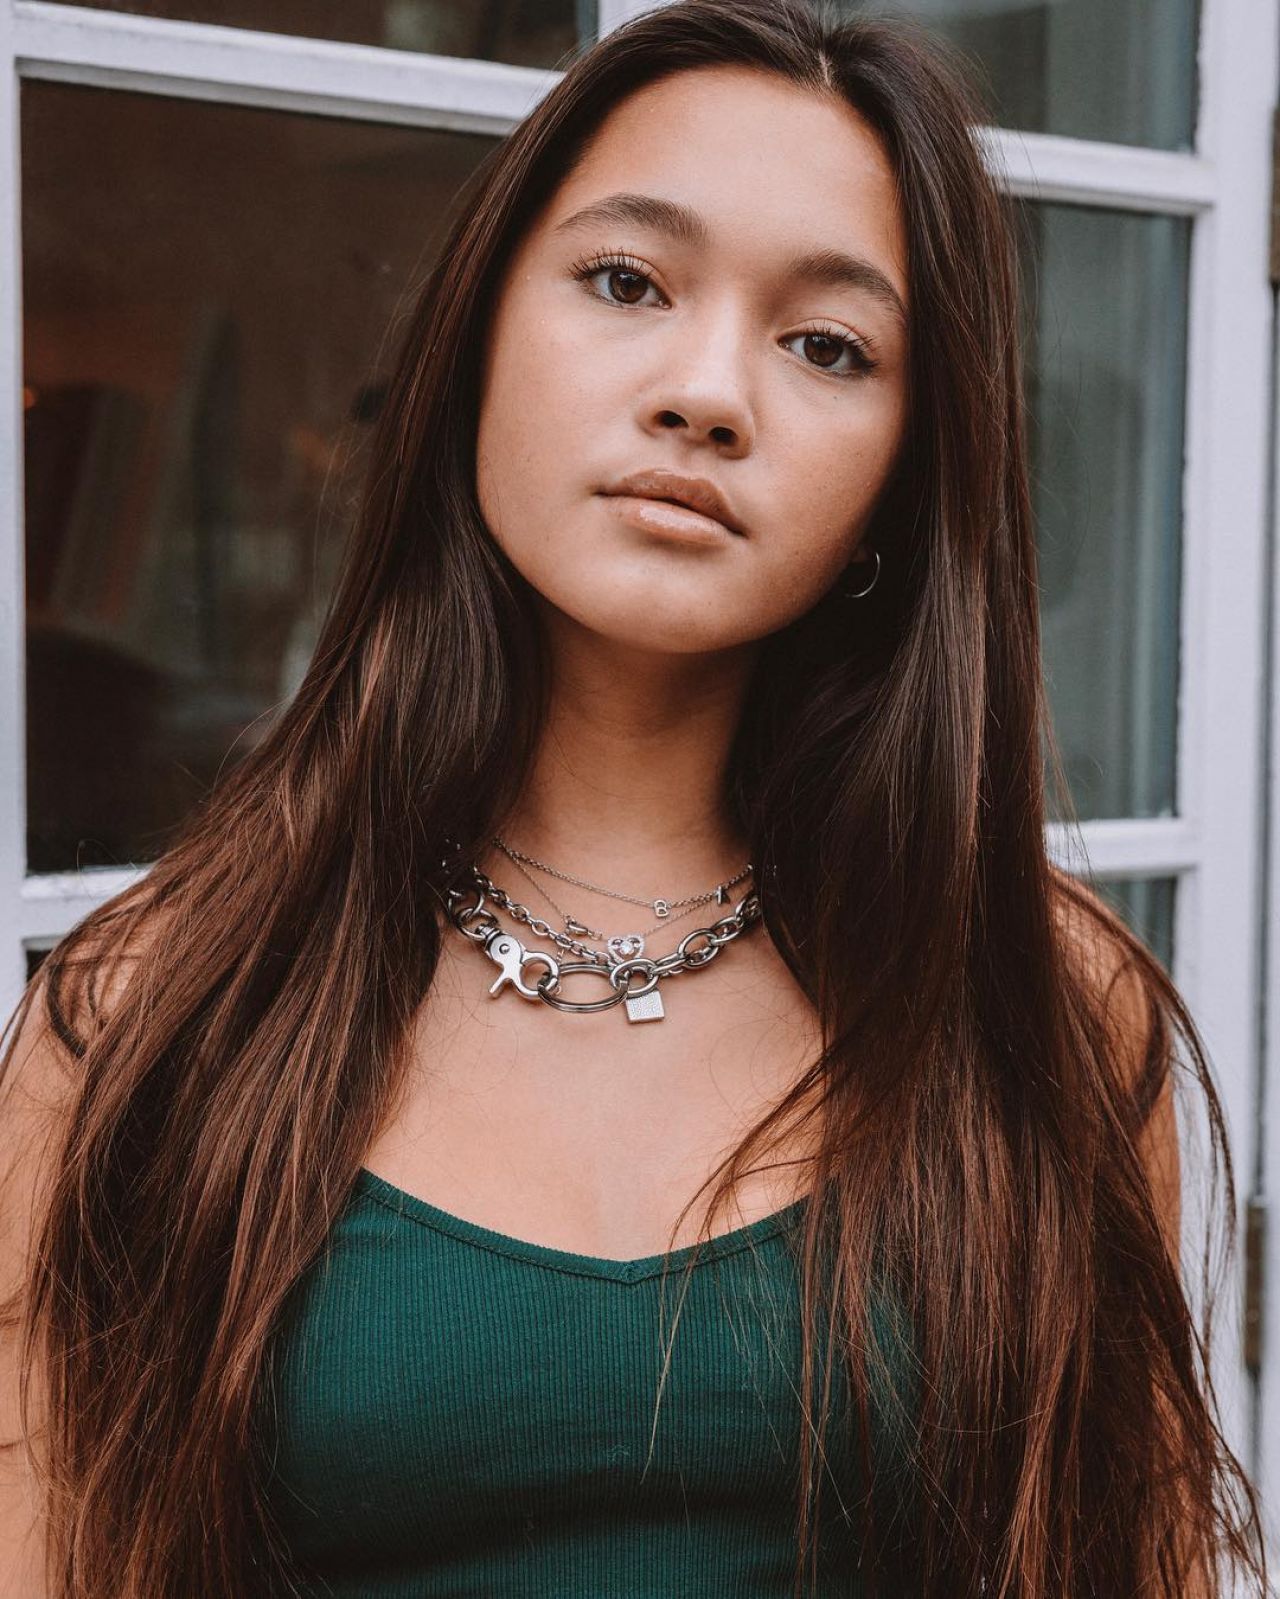 Lily Chee - Personal Pics 02/11/2019.